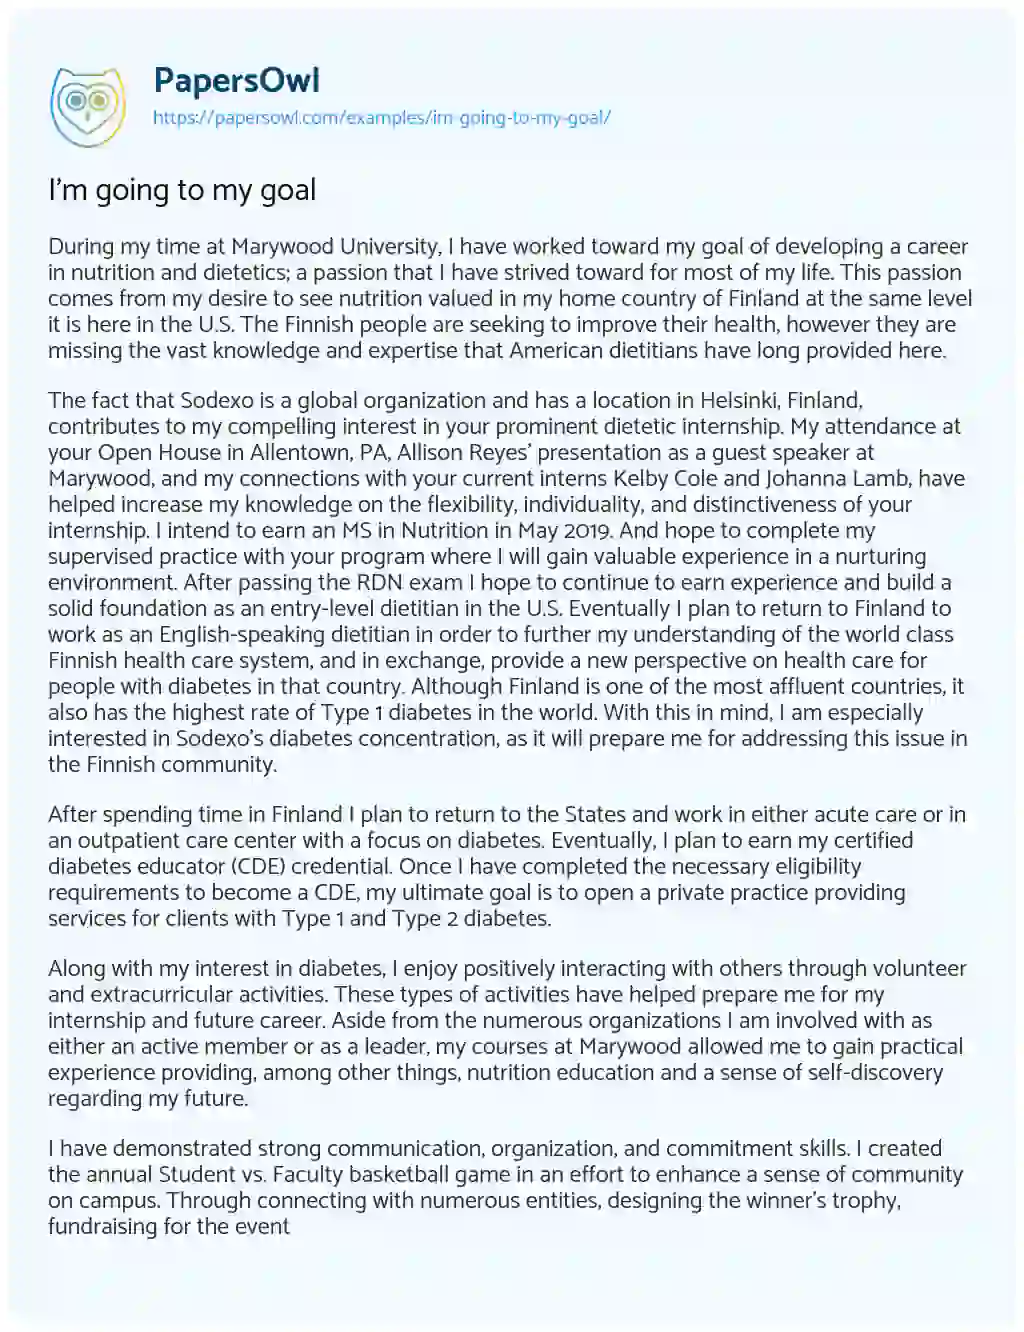 Essay on I’m Going to my Goal